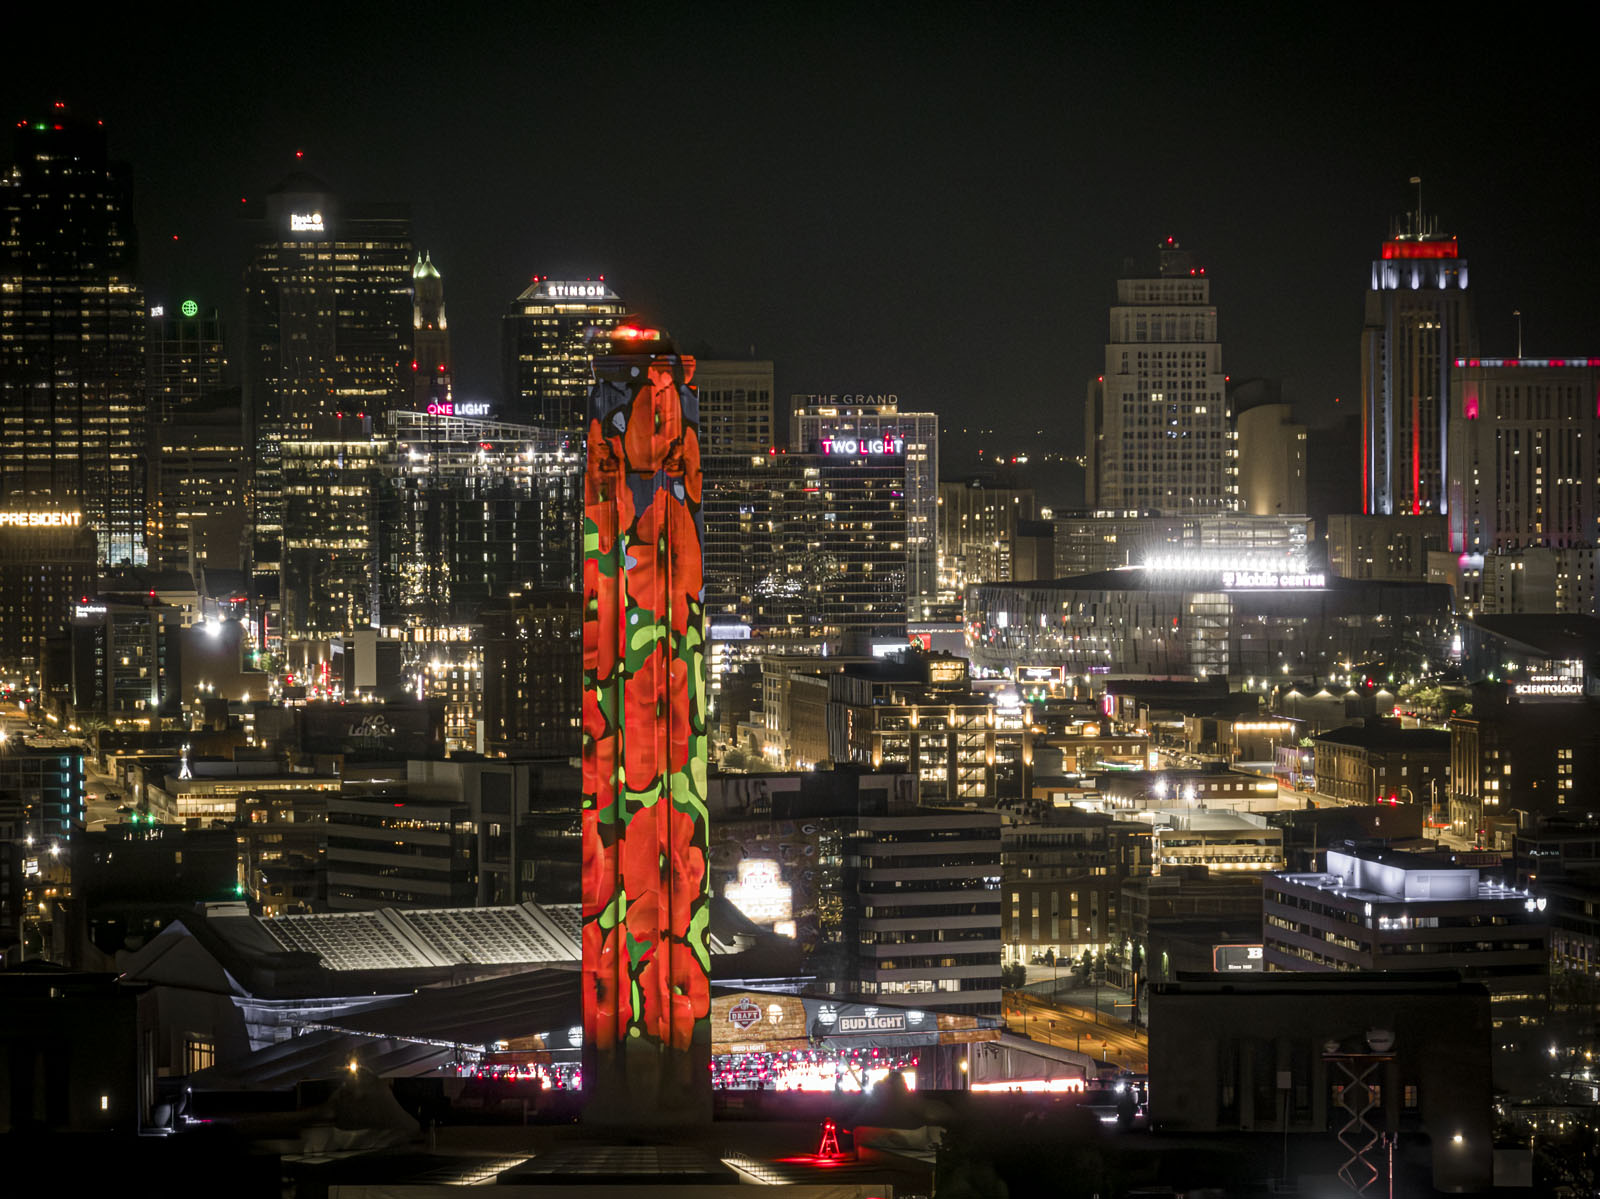 Modern photograph taken at night. Liberty Memorial Tower is in the foreground, lit up with poppy projections. The Kansas City downtown skyline is in the background, lit up brilliantly.